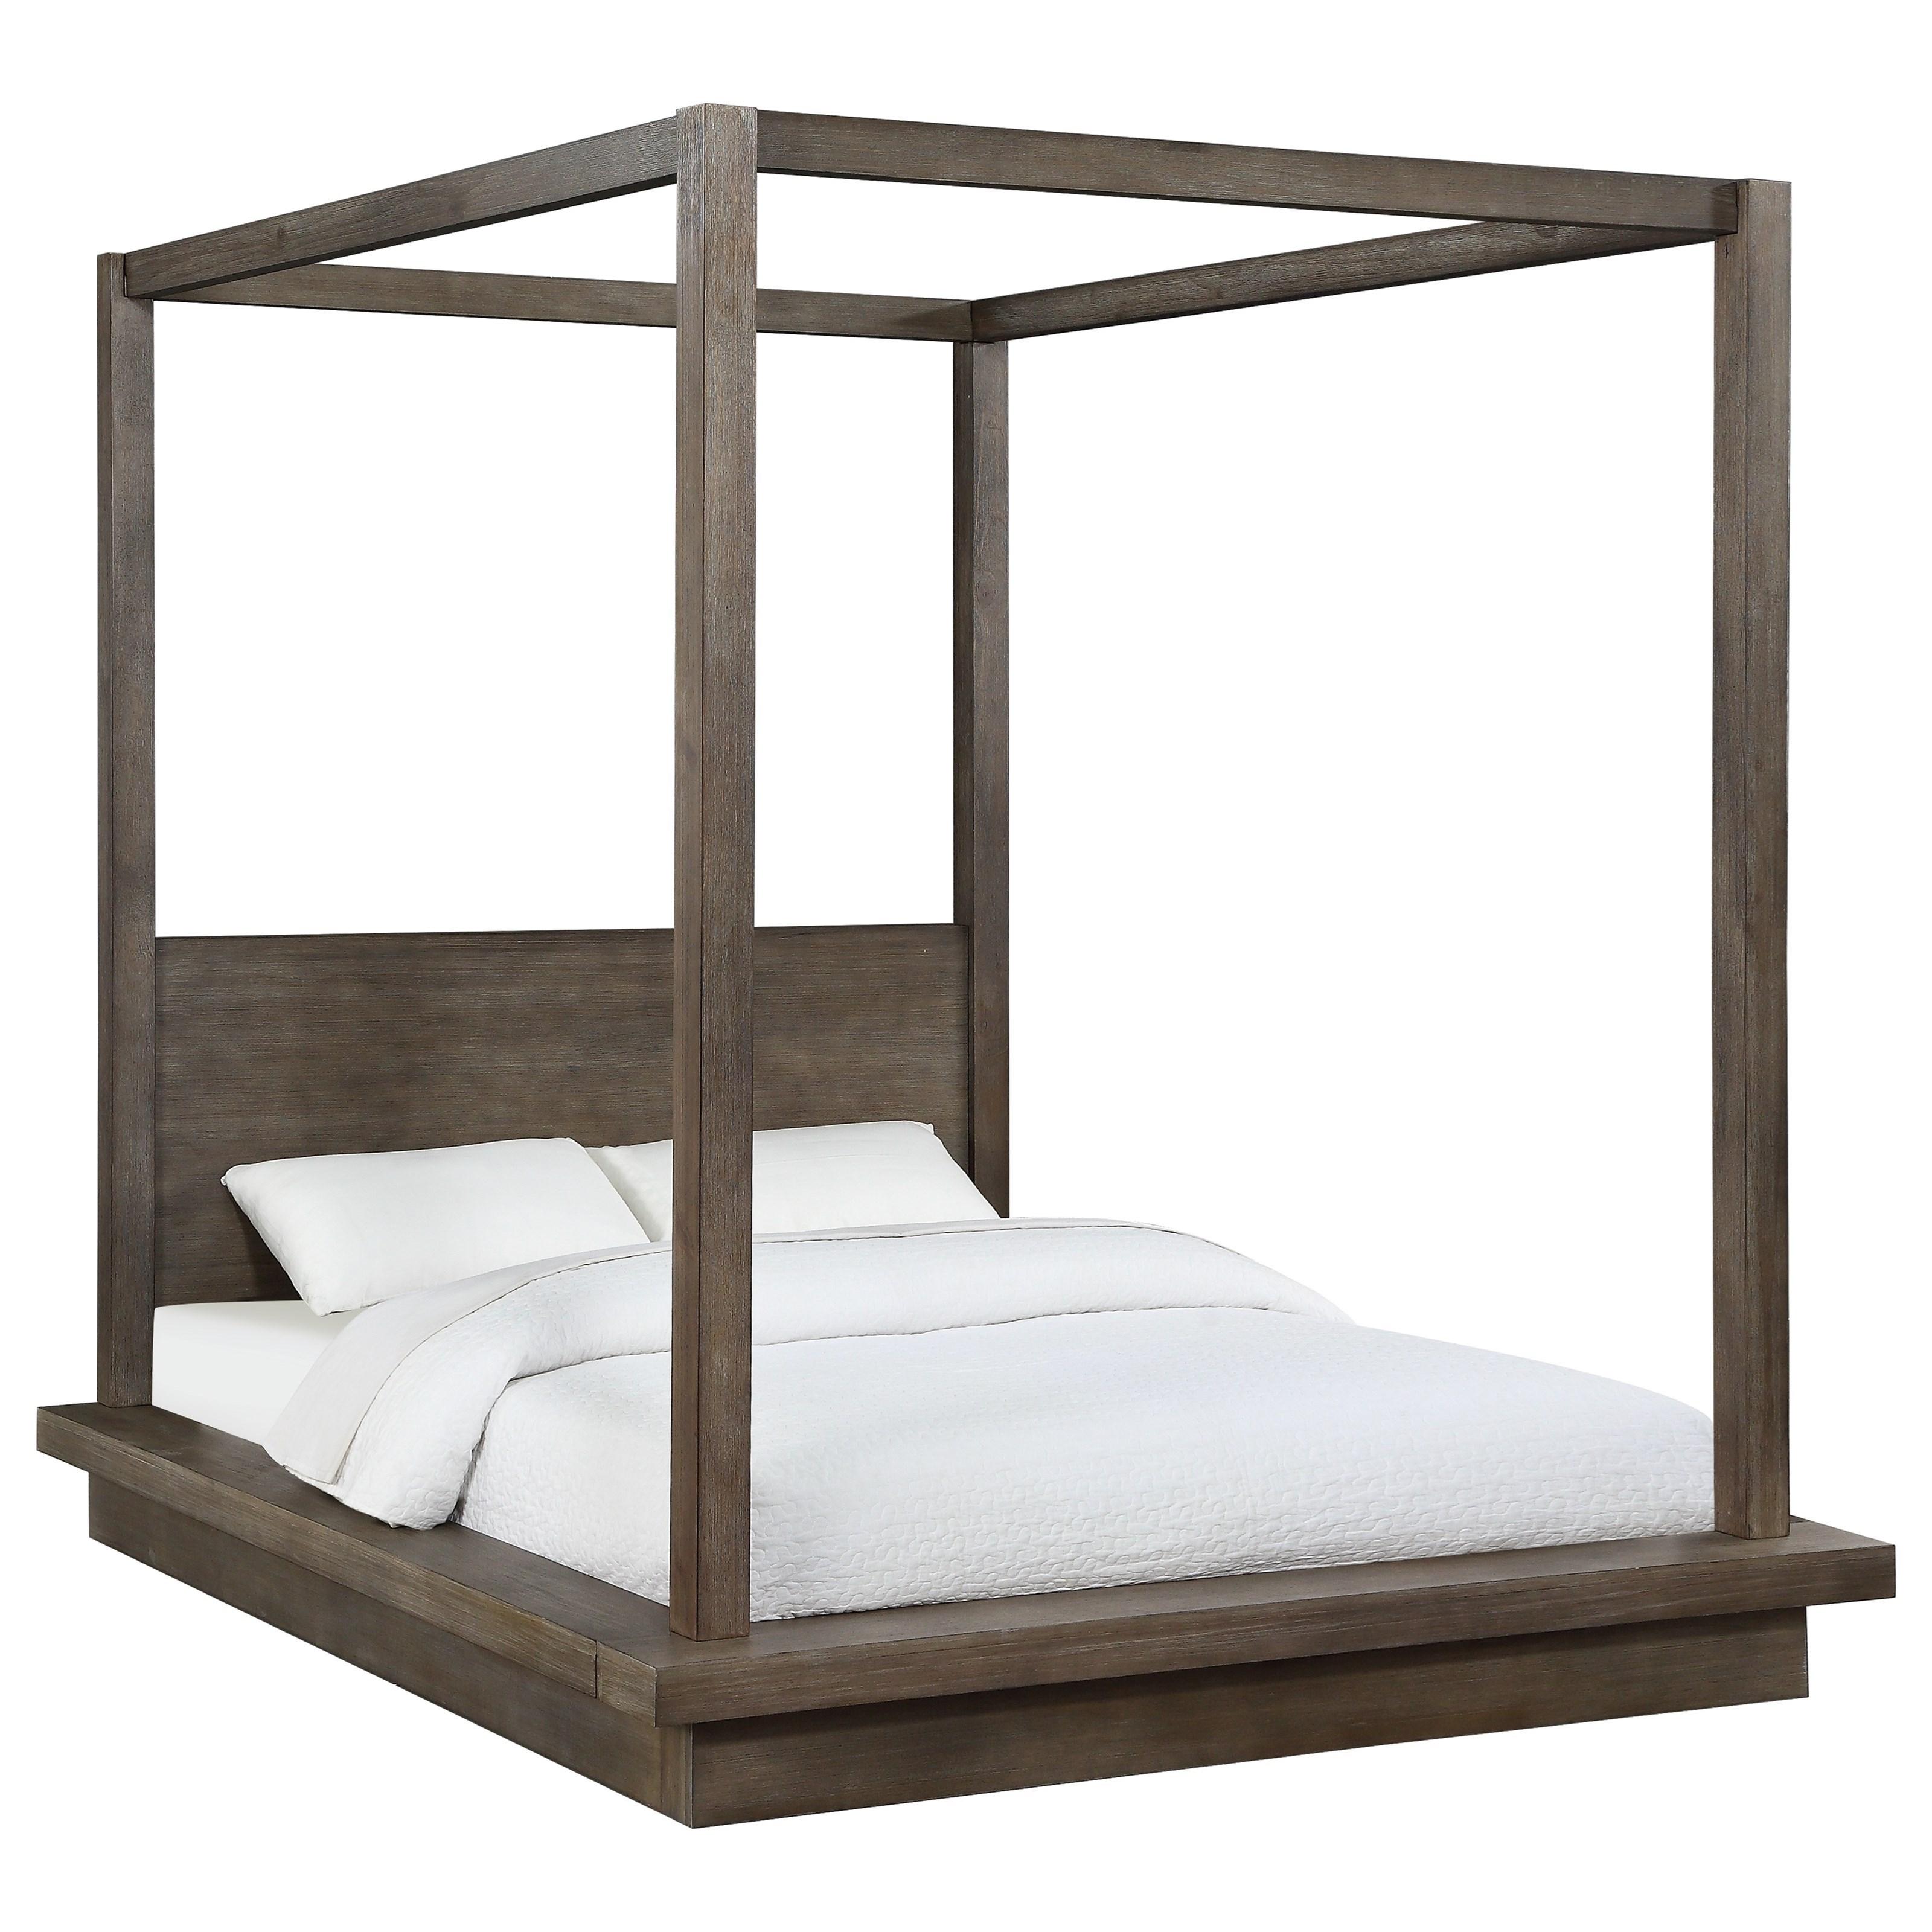 Contemporary, Rustic Canopy Bed MELBOURNE CANOPY 8D64F7 in Brown 